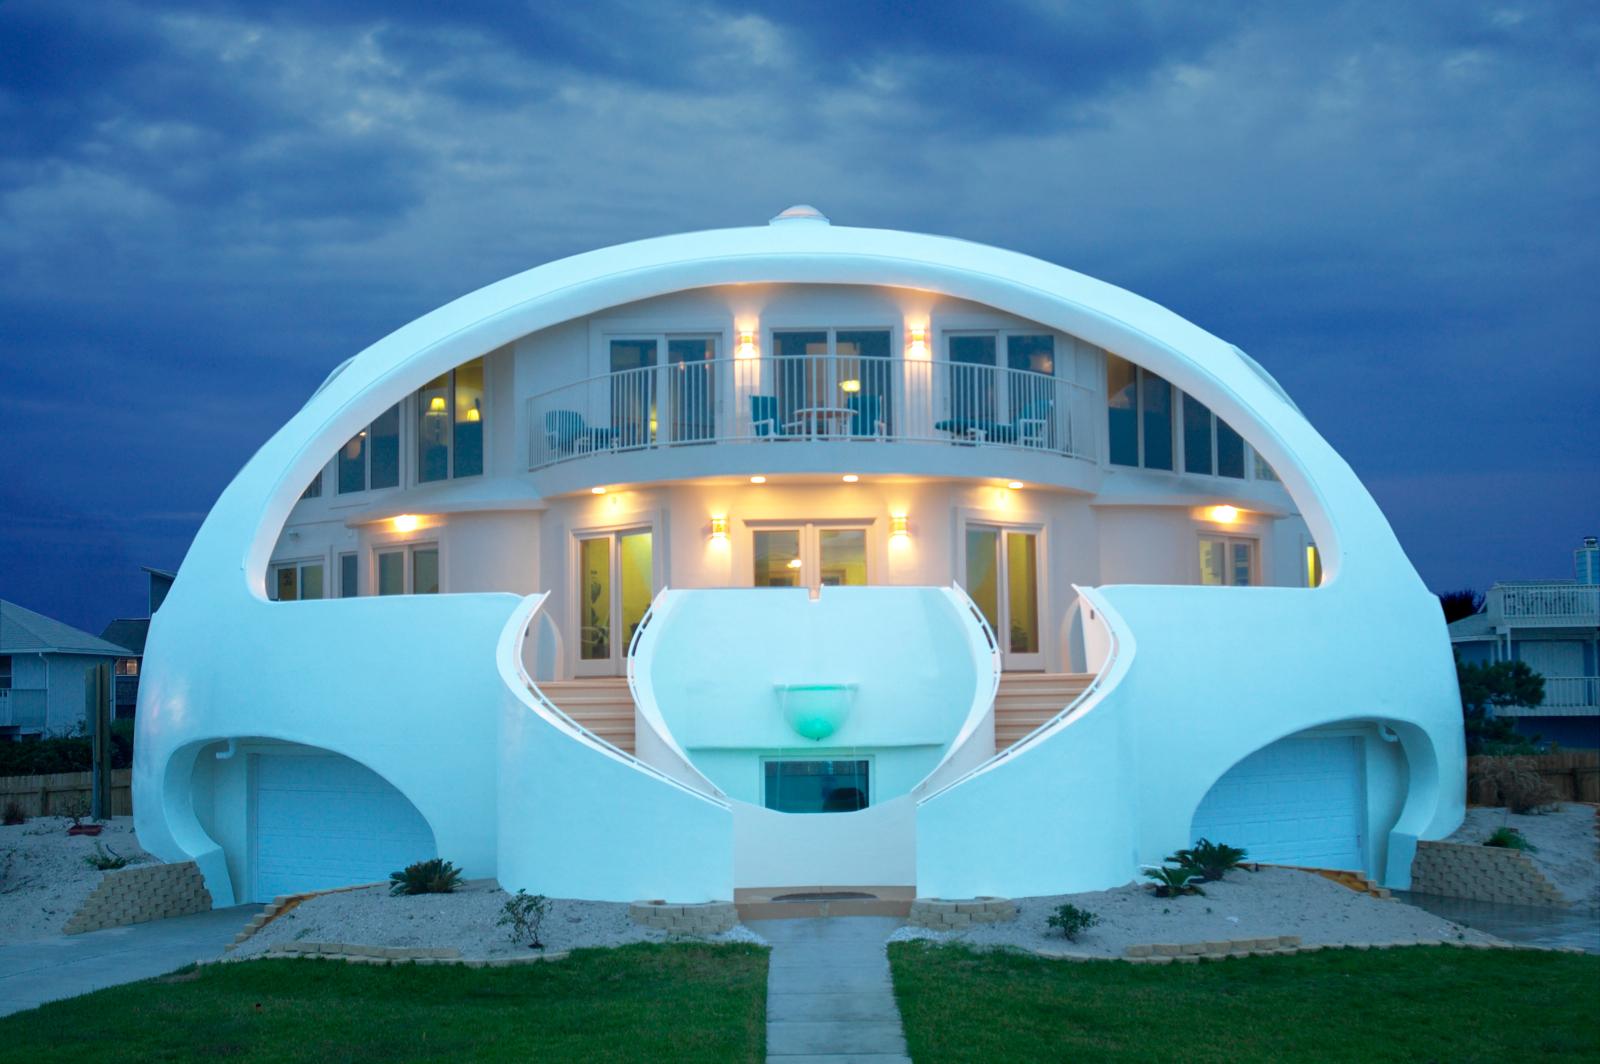 Beautiful twilight image of Dome of a Home beach house.